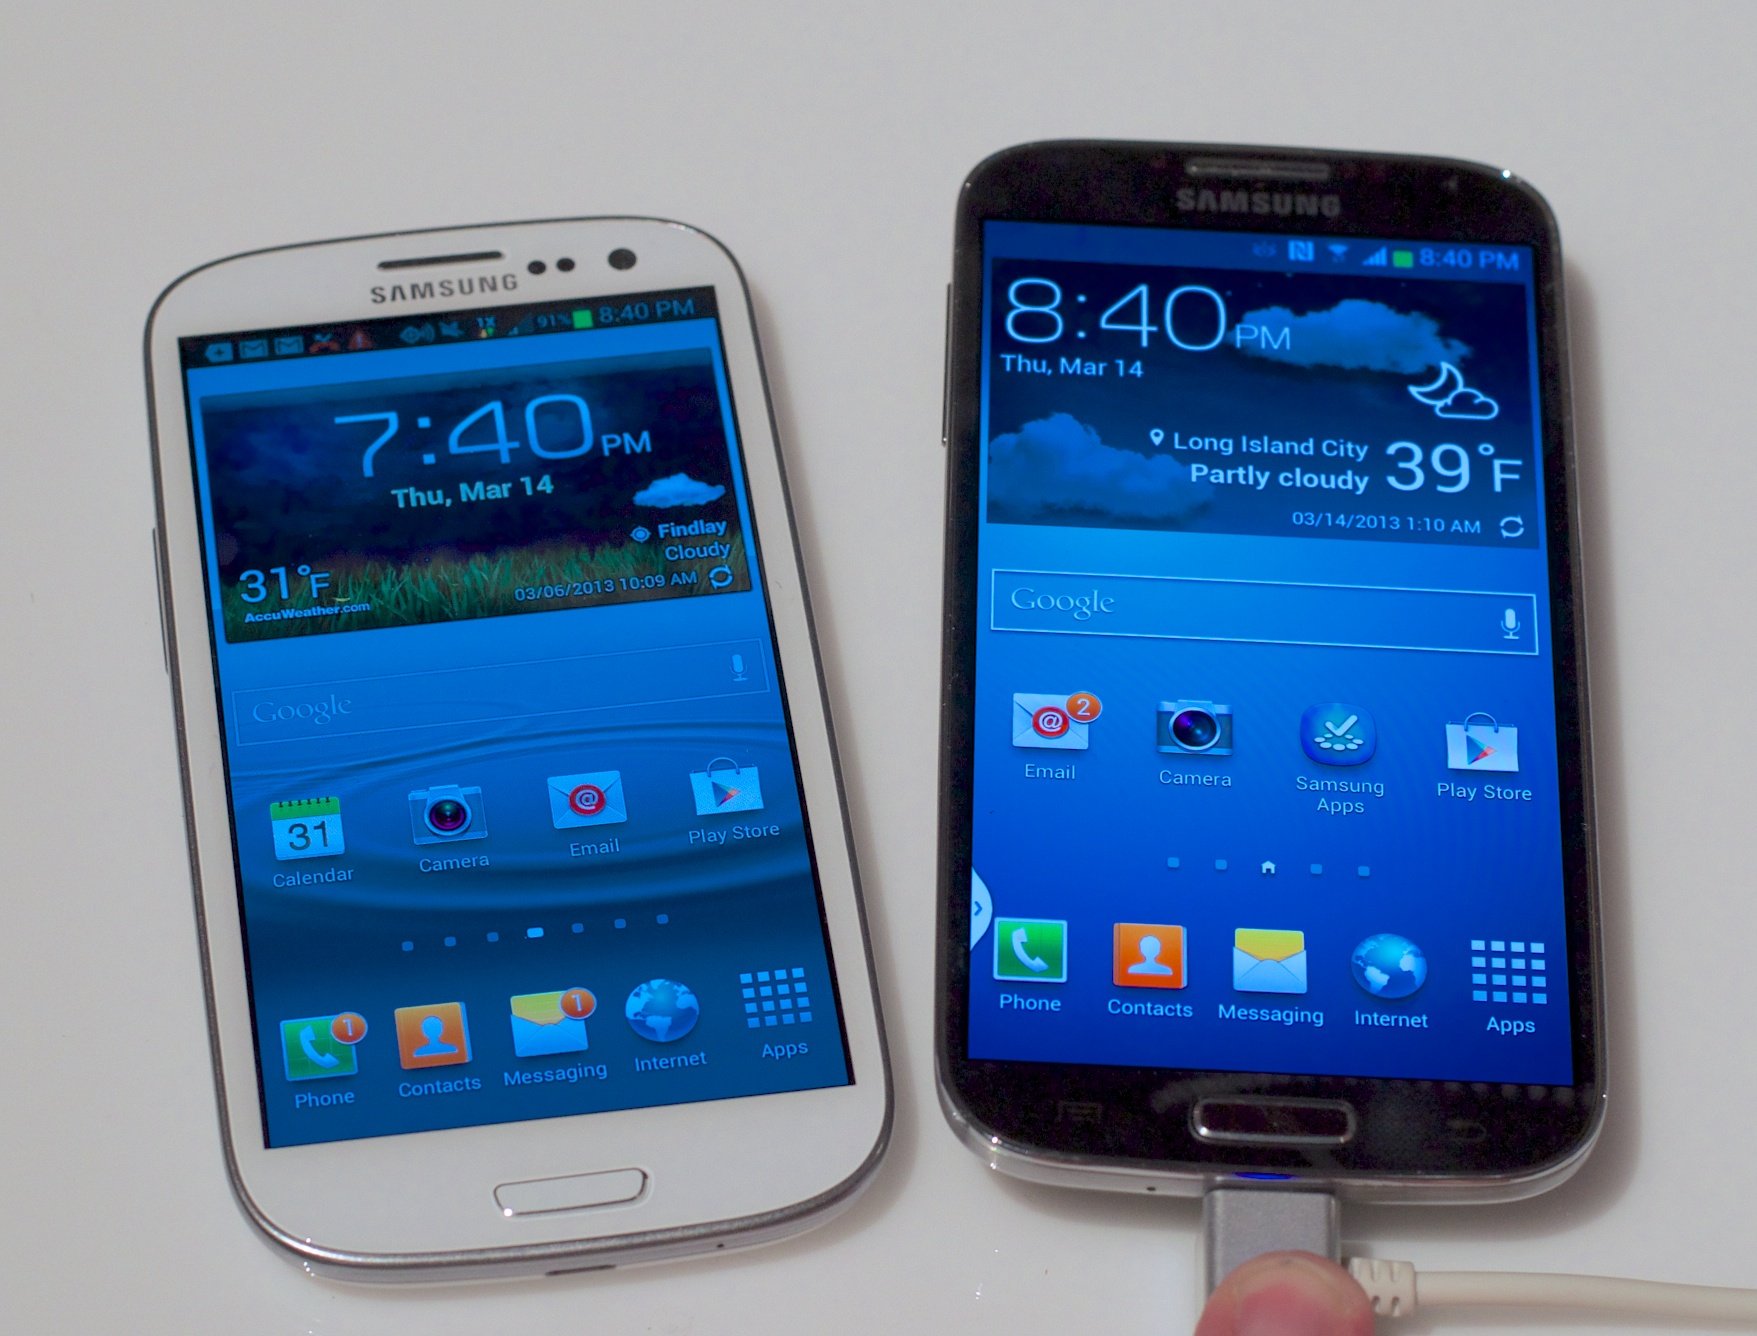 Galaxy S3 and Galaxy S4 trade-in deals offer a good deal for users that want to upgrade.